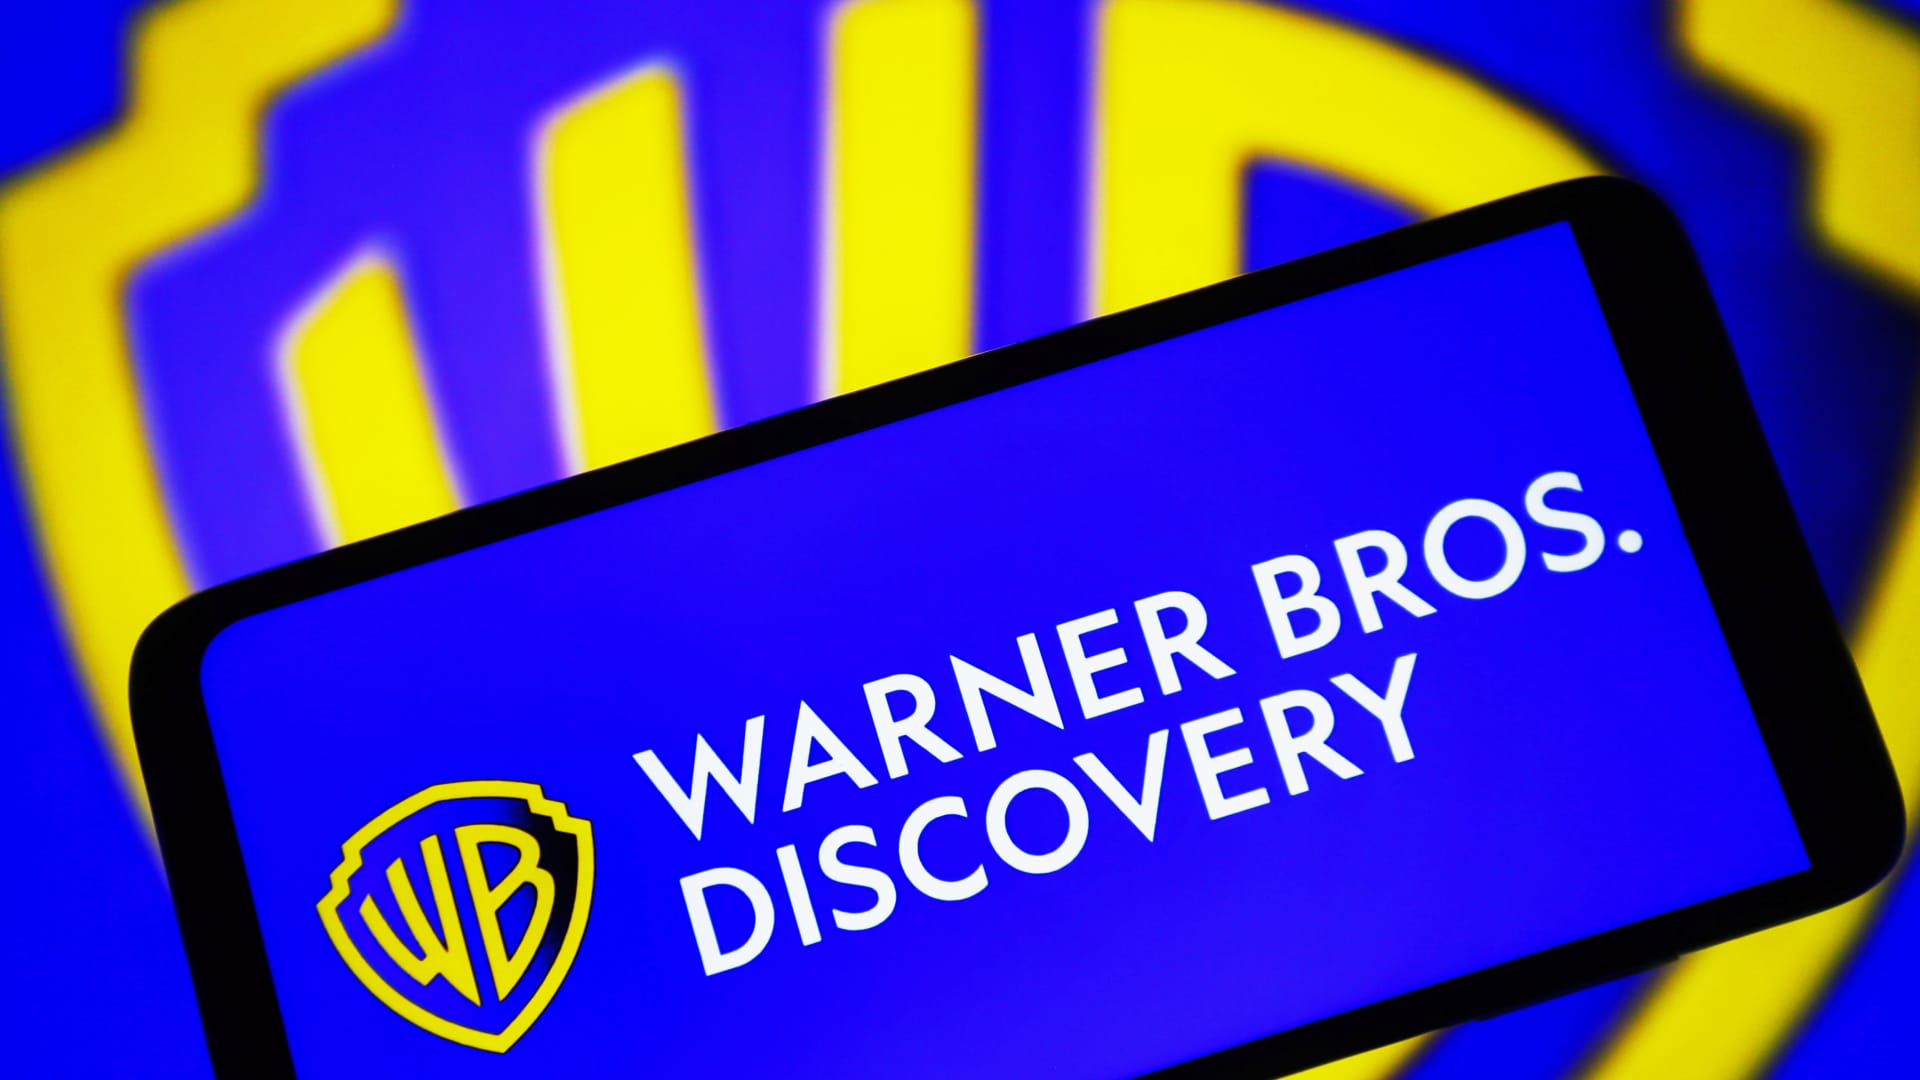 Warner Bros Discovery (WBD) earnings report 1Q23